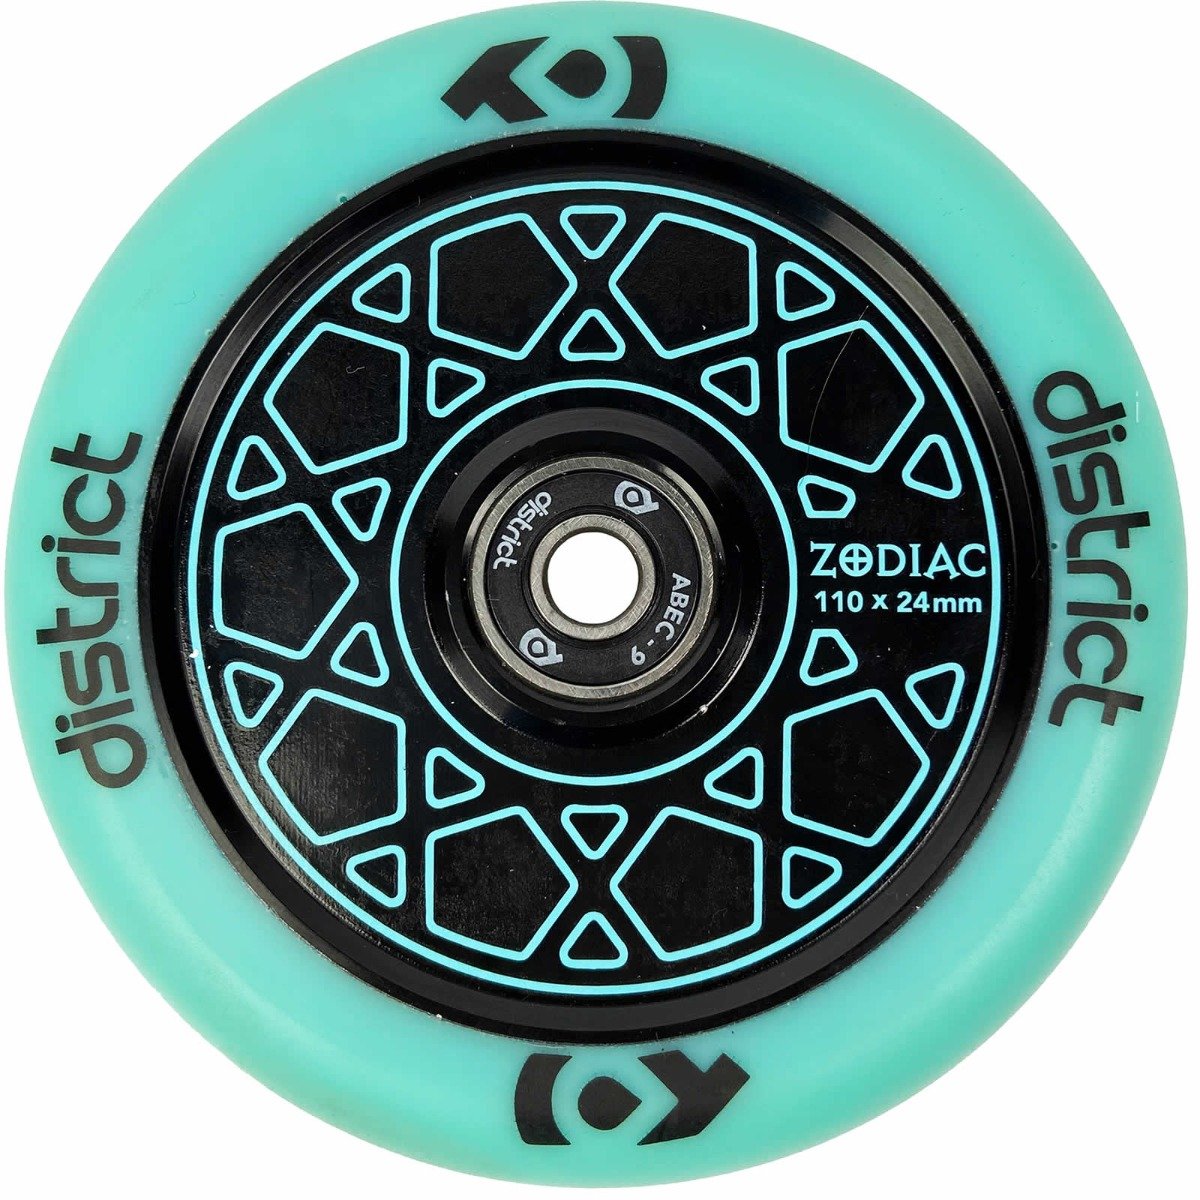 An image of District Zodiac Black Sky Blue Stunt Scooter Wheels - 110mm